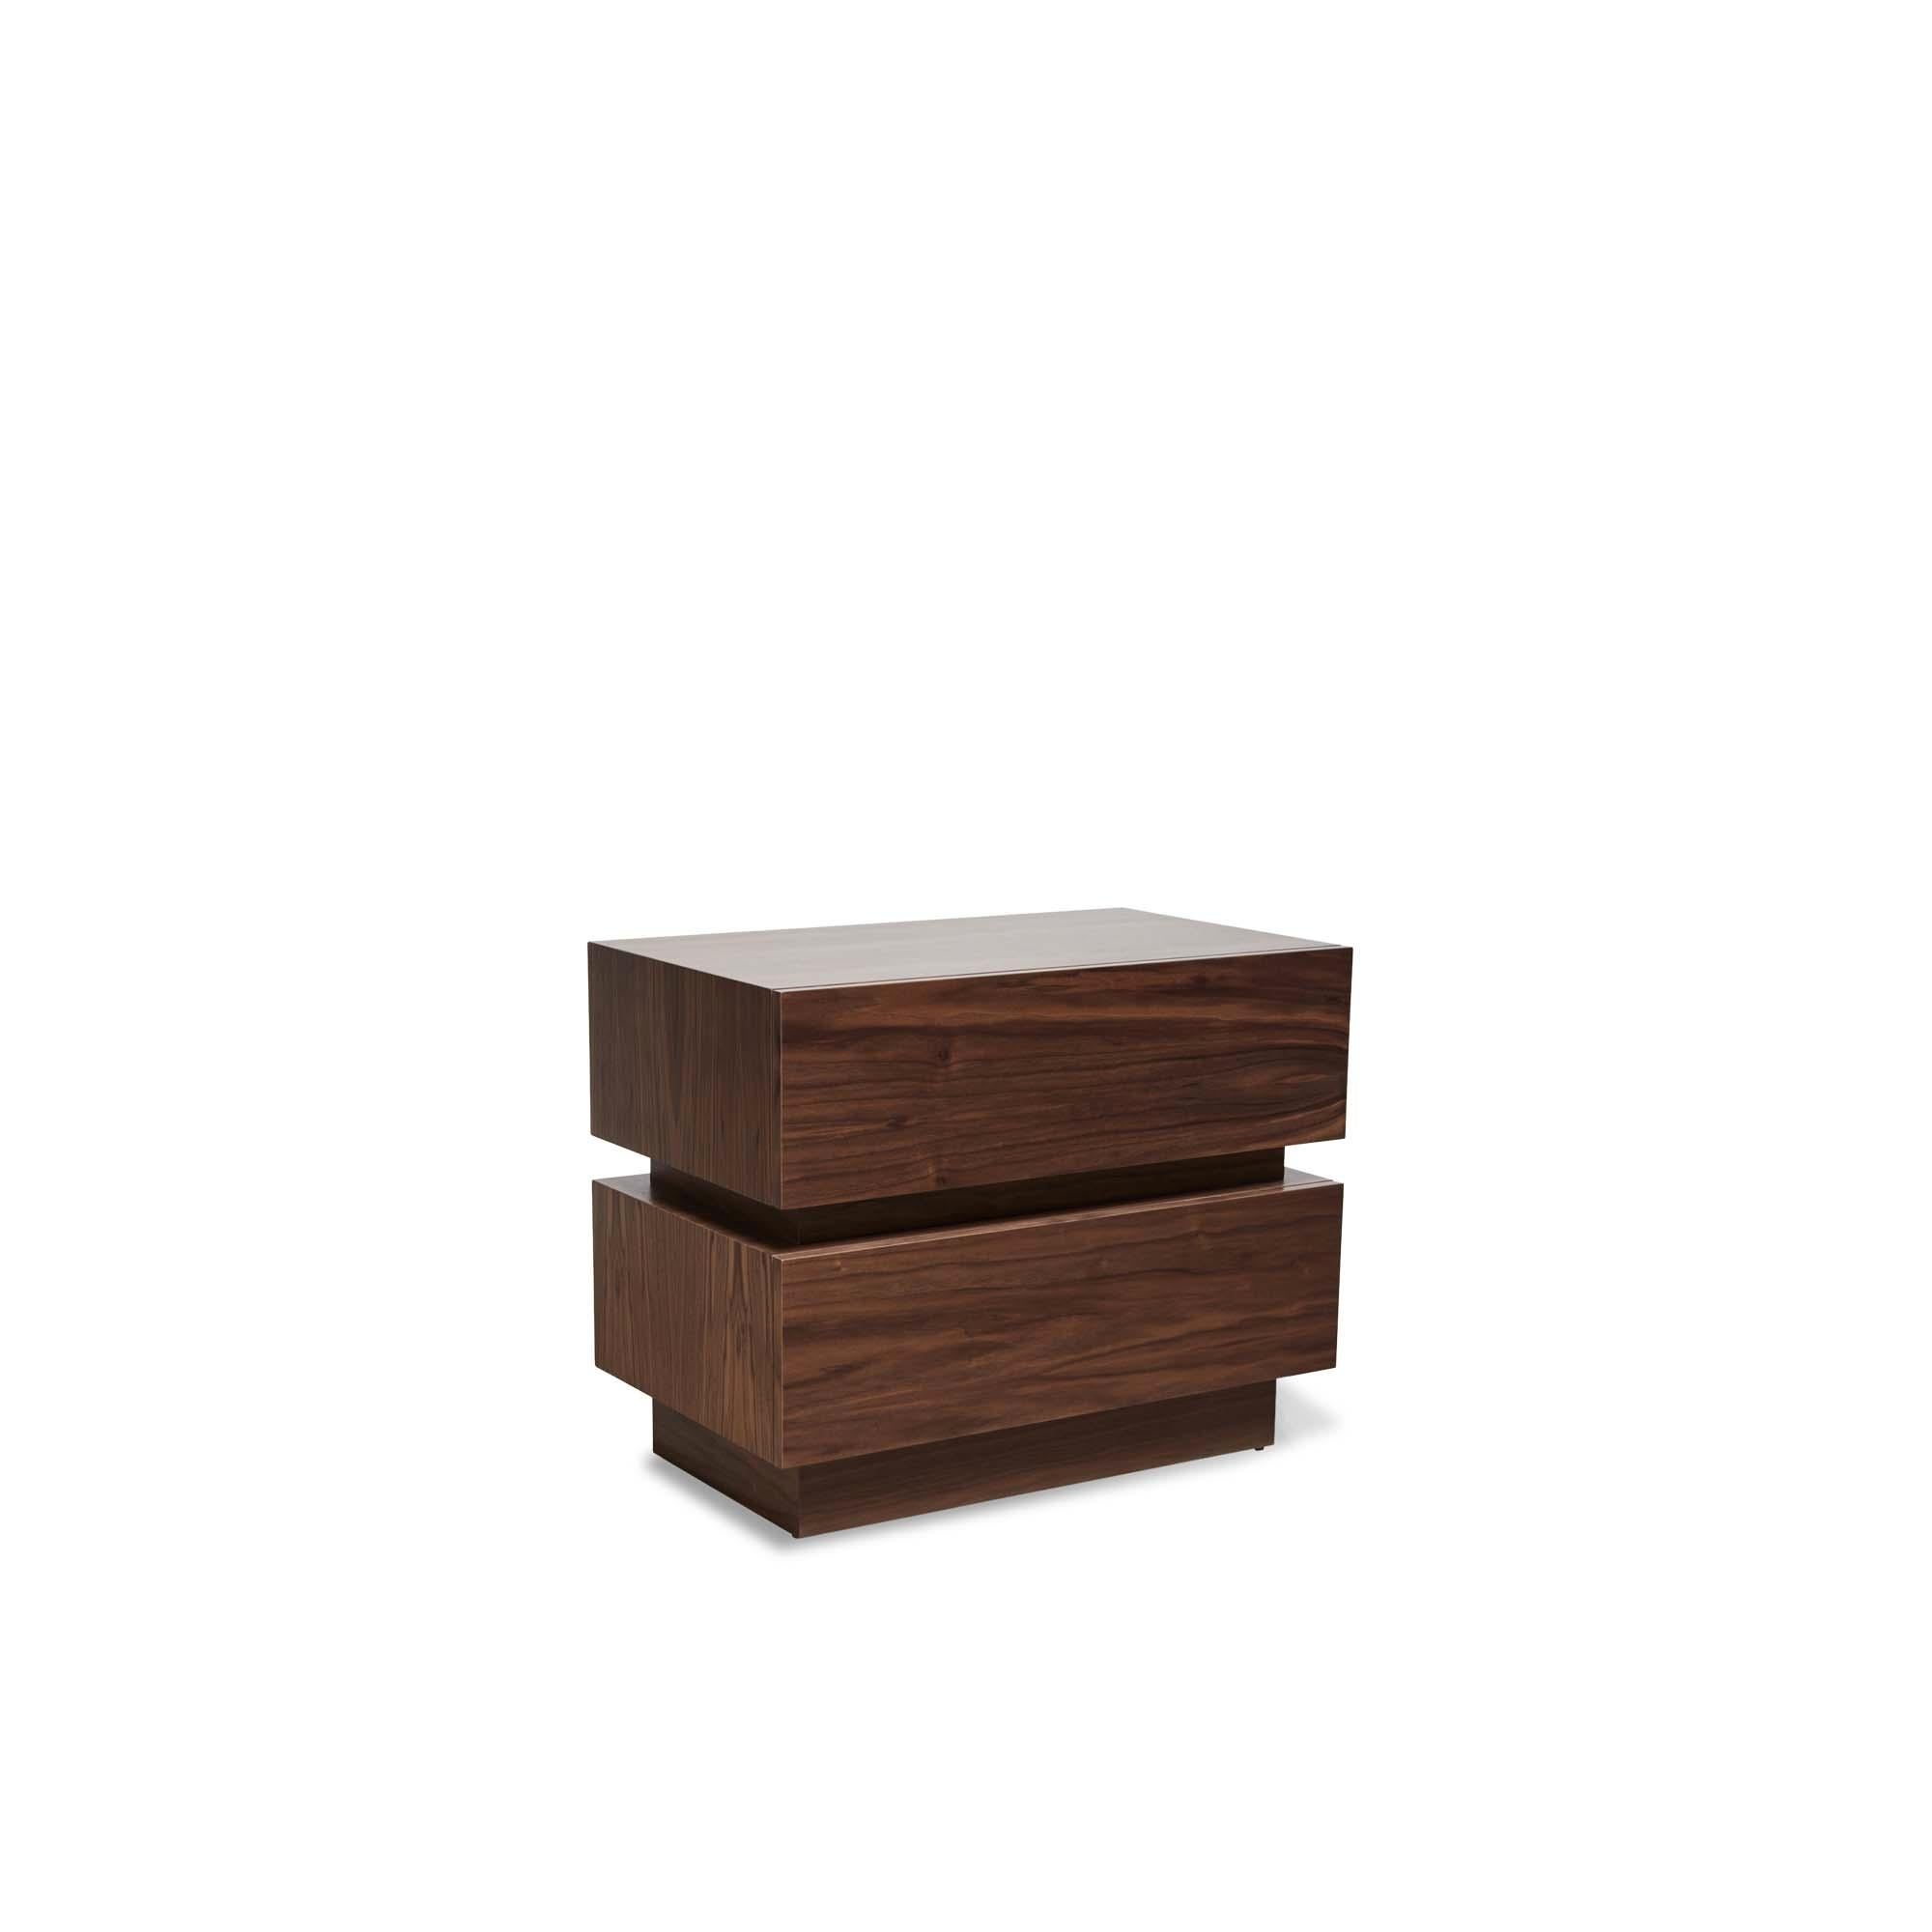 The stacked box nightstand is a bedside table with two drawers that is available in either American walnut or white oak. Available in two sizes.

The Lawson-Fenning Collection is designed and handmade in Los Angeles, California. Reach out to